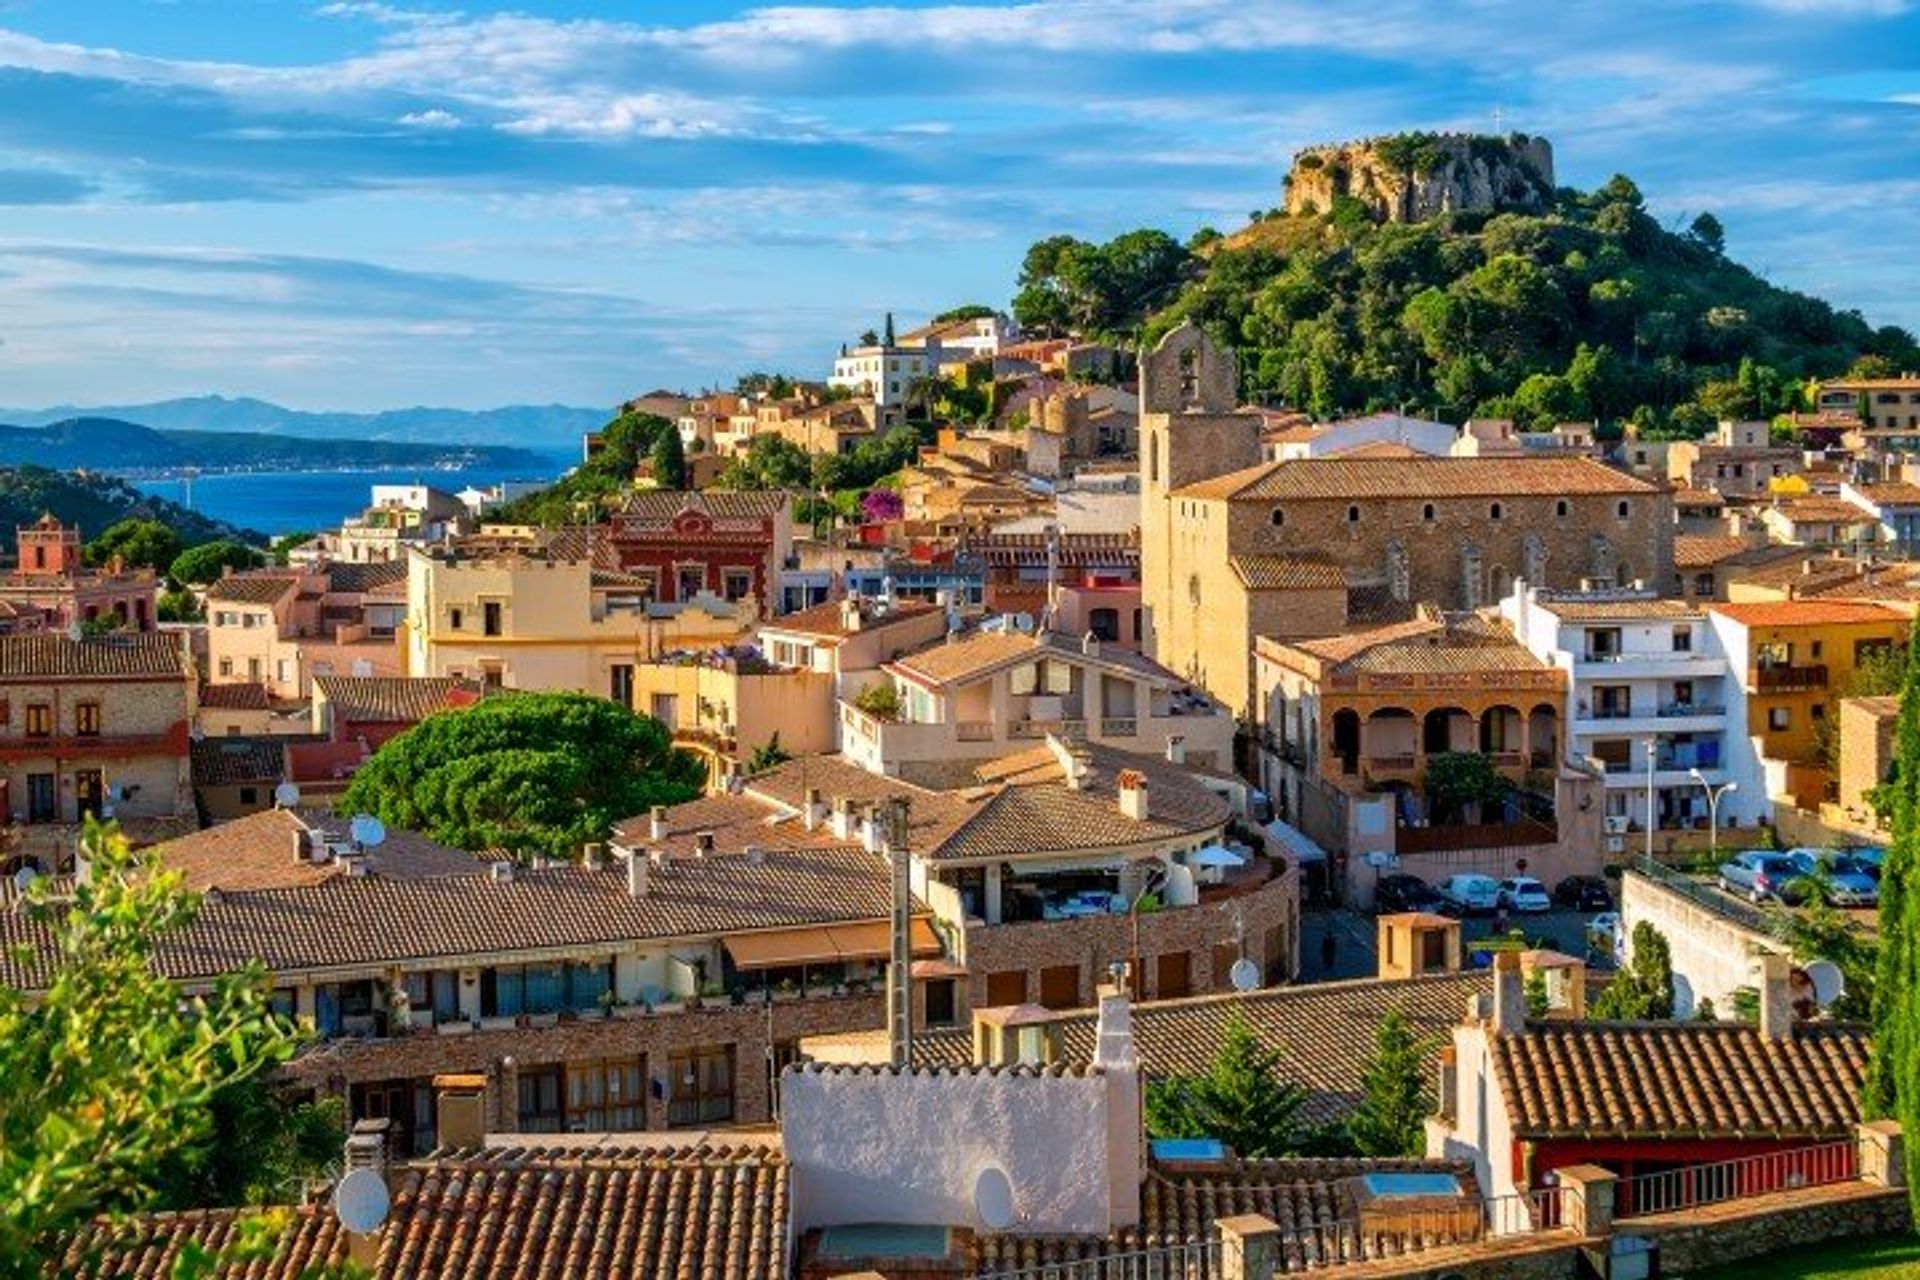 The old town of Begur with the Bay of Estartit and Pyrenees mountains in the distance